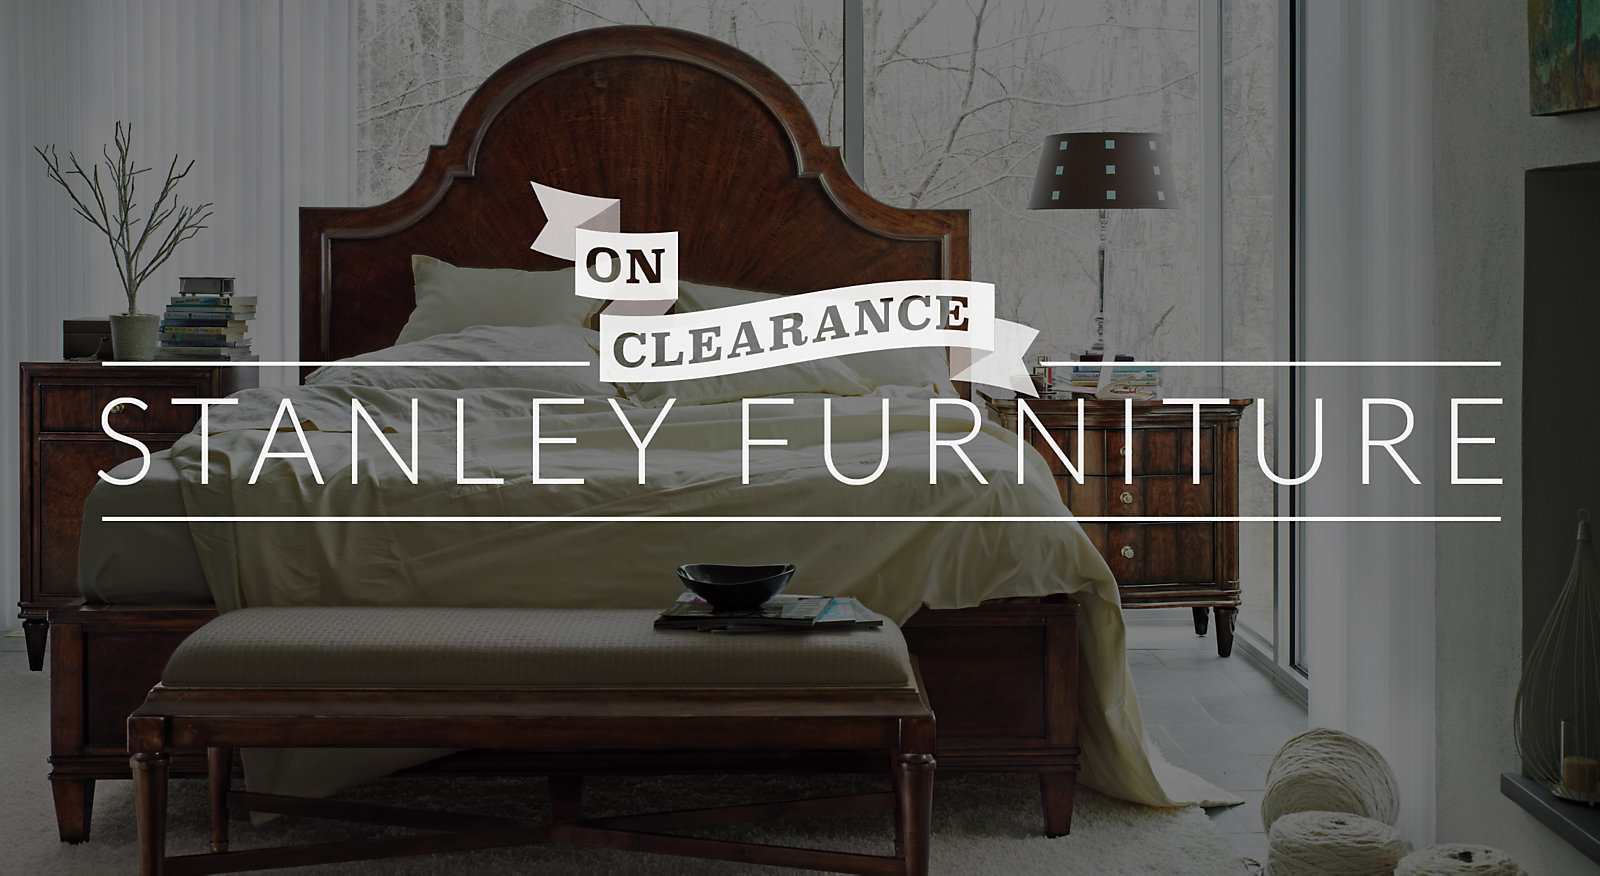 Vietnam Linked Furniture Group Acquires Stanley Furniture Assets